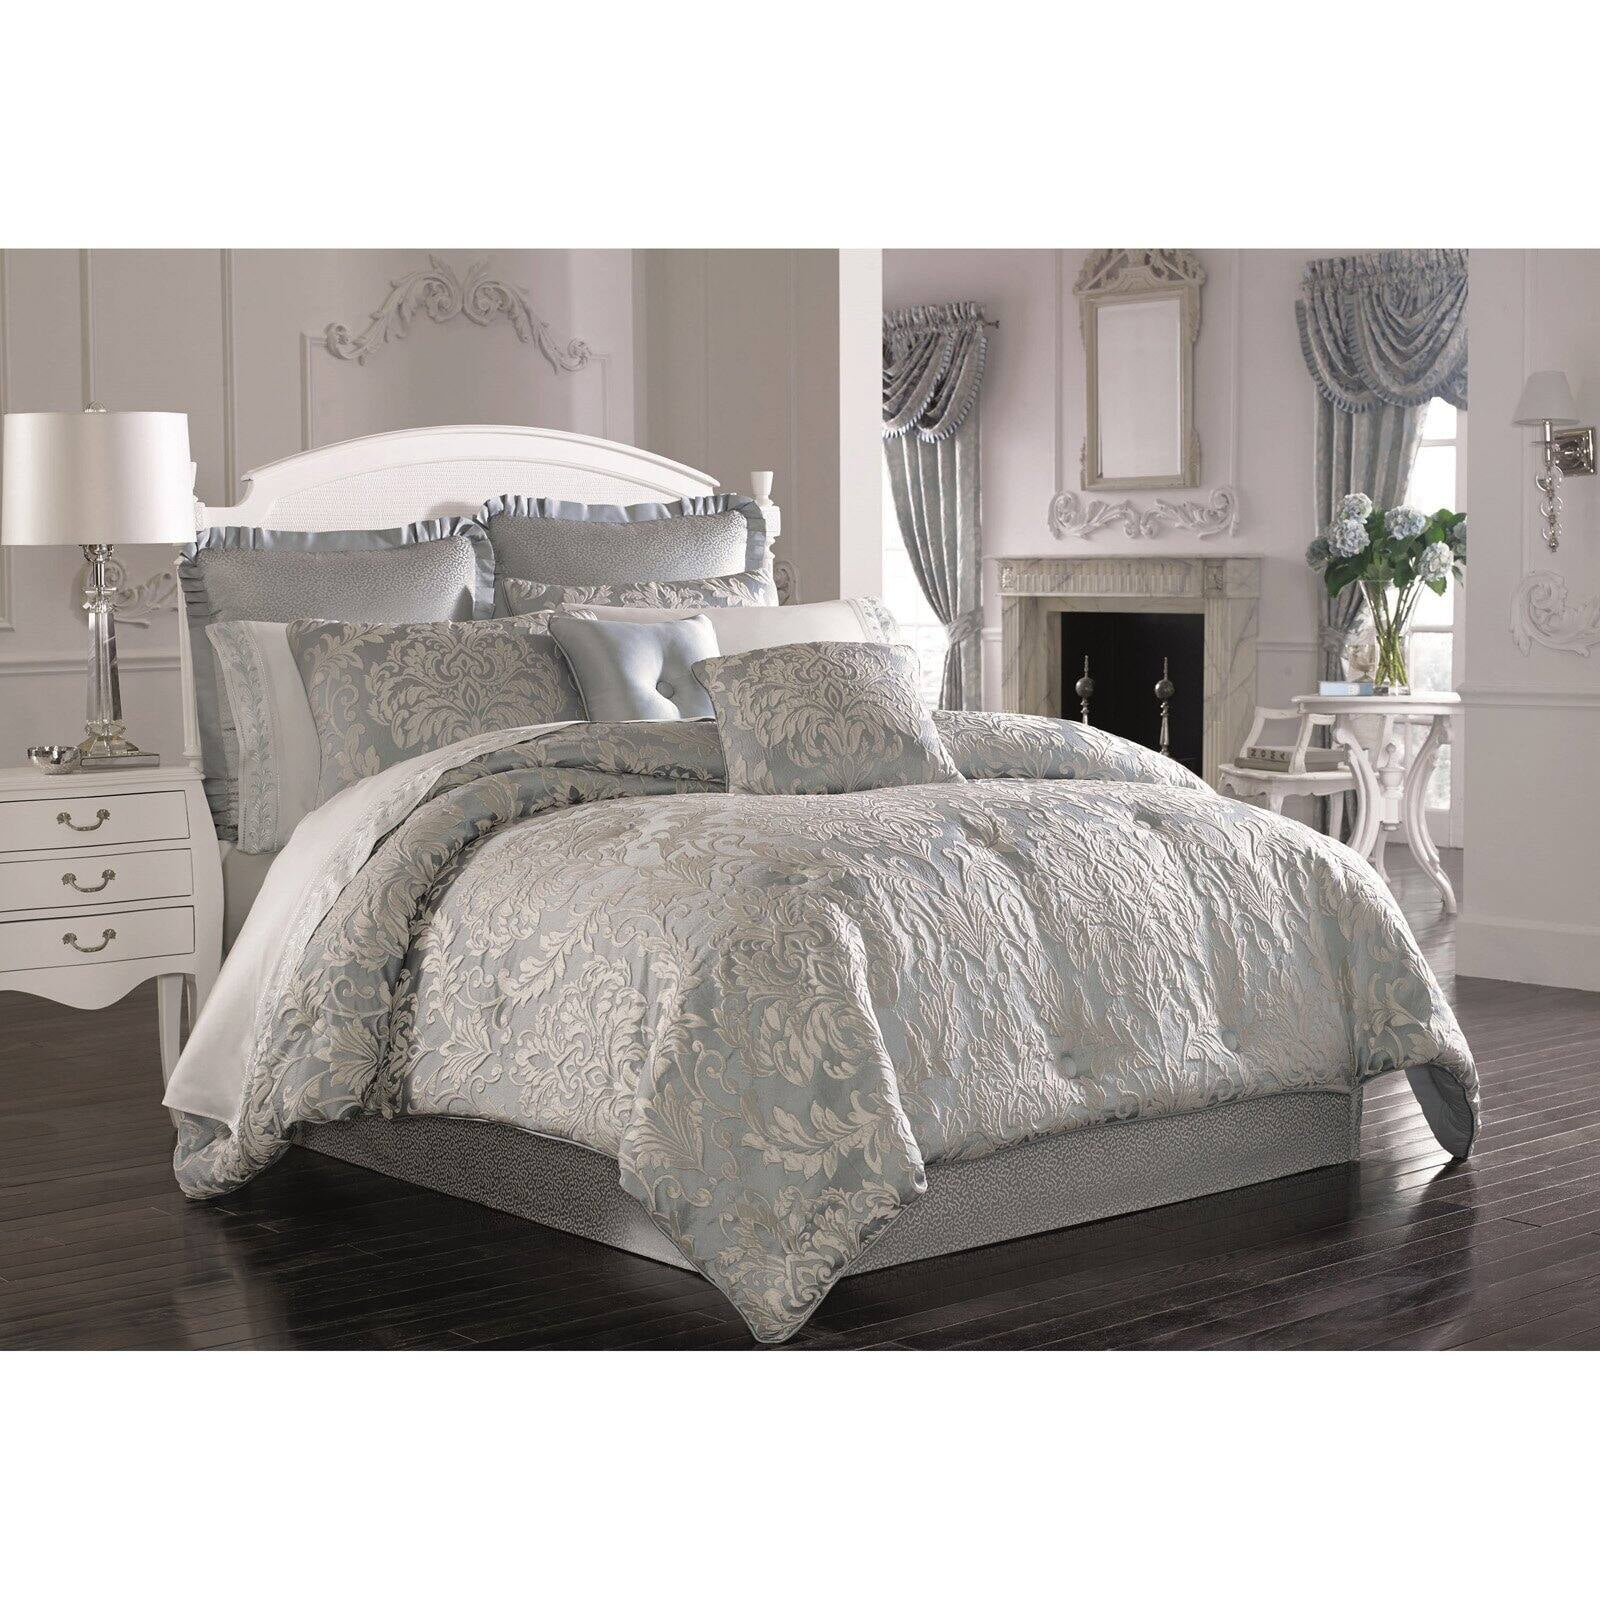 Pearl Five Queens Court Zarah Satin Damask Embroidered Coverlet Full/Queen